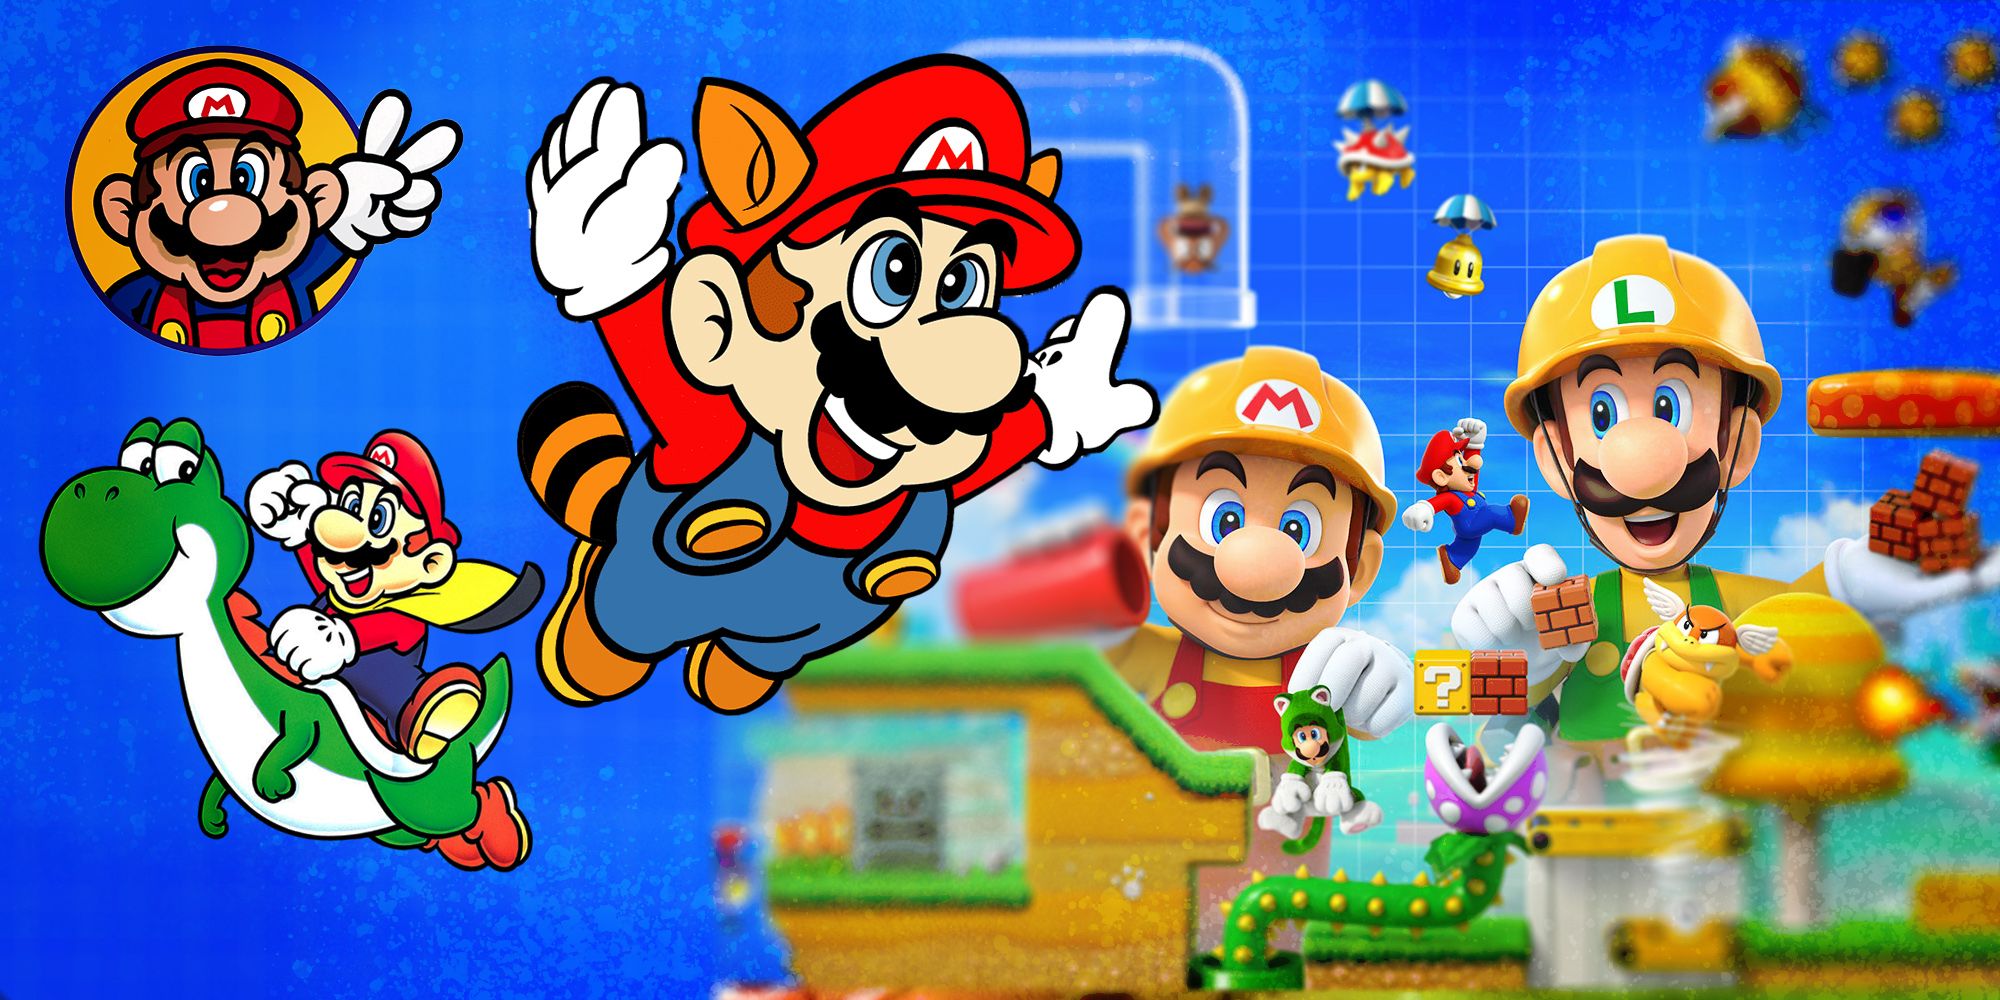 I Ranked Every MARIO Game on the NES! 